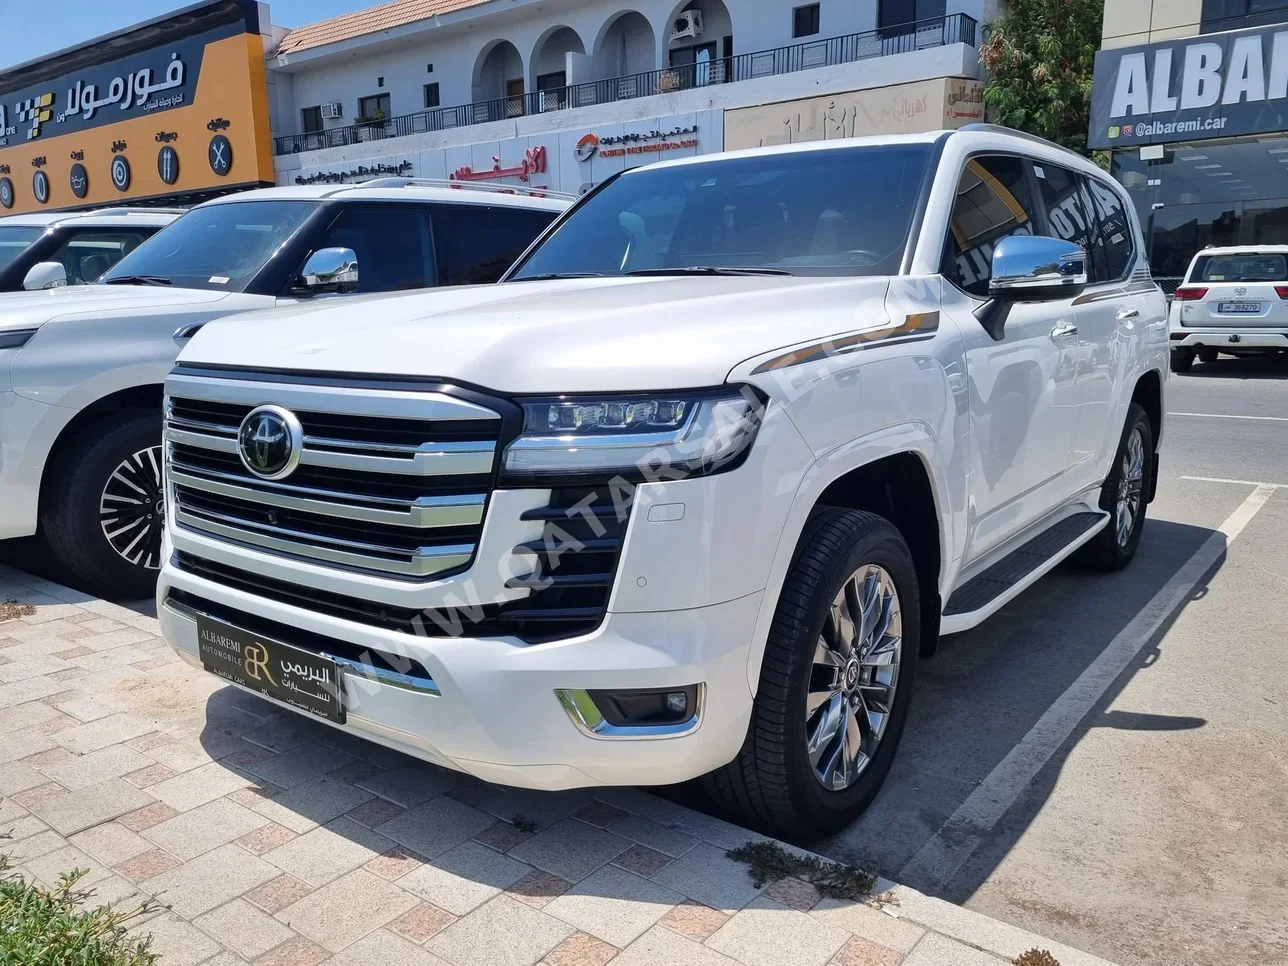 Toyota  Land Cruiser  VXR  2022  Automatic  90,000 Km  8 Cylinder  Four Wheel Drive (4WD)  SUV  White  With Warranty